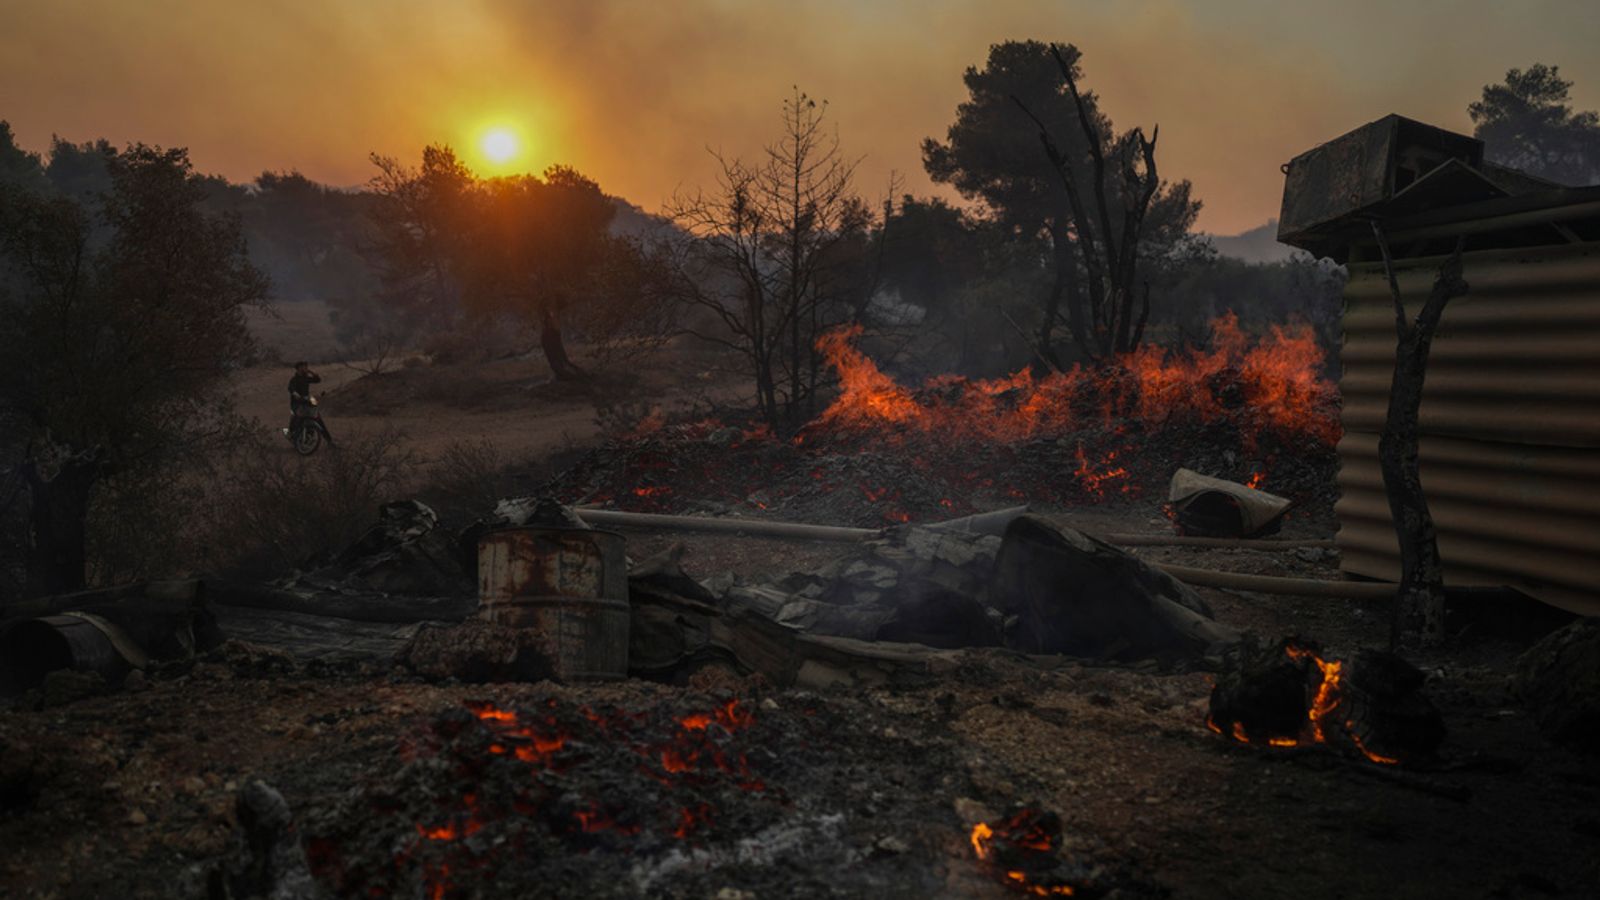 Extreme weather: Temperatures of more than 40C persist in Europe and wildfires rage in Greece, as US braces for record heat